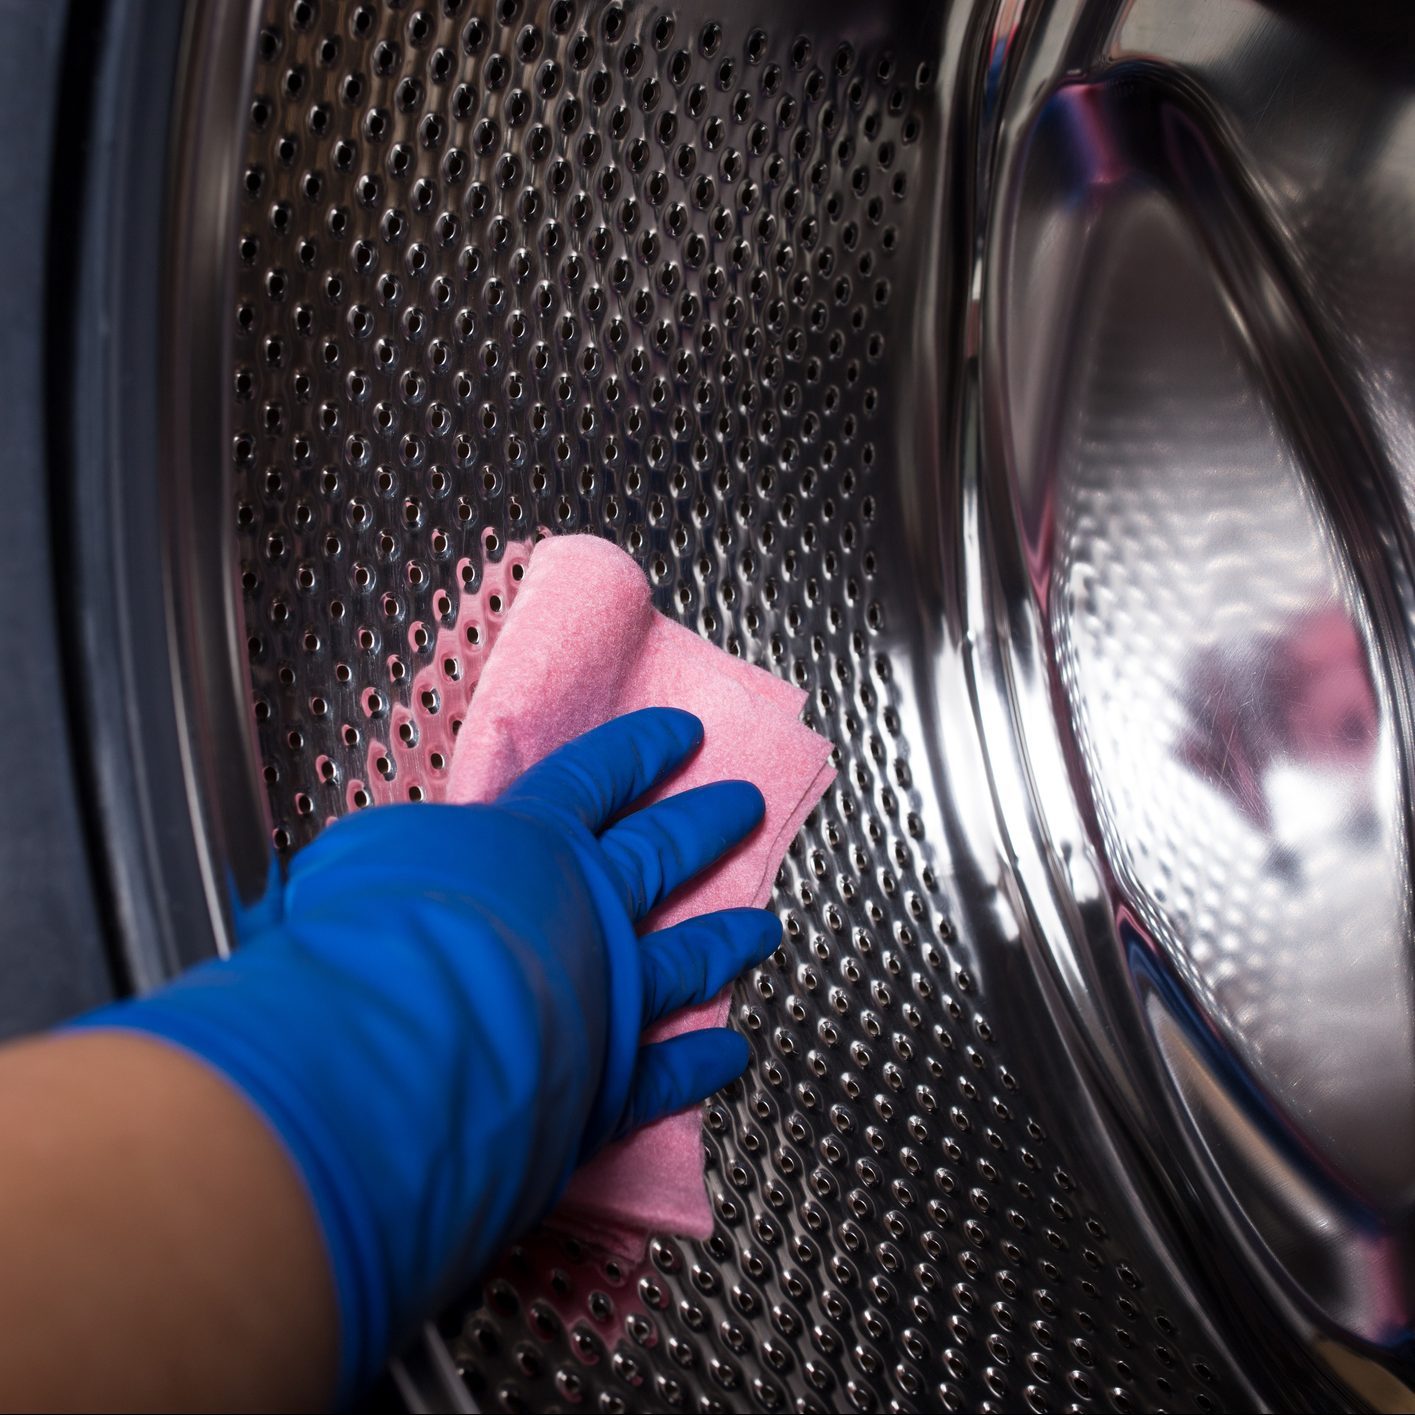  How to Clean Your Washing Machine, According to Laundry Experts